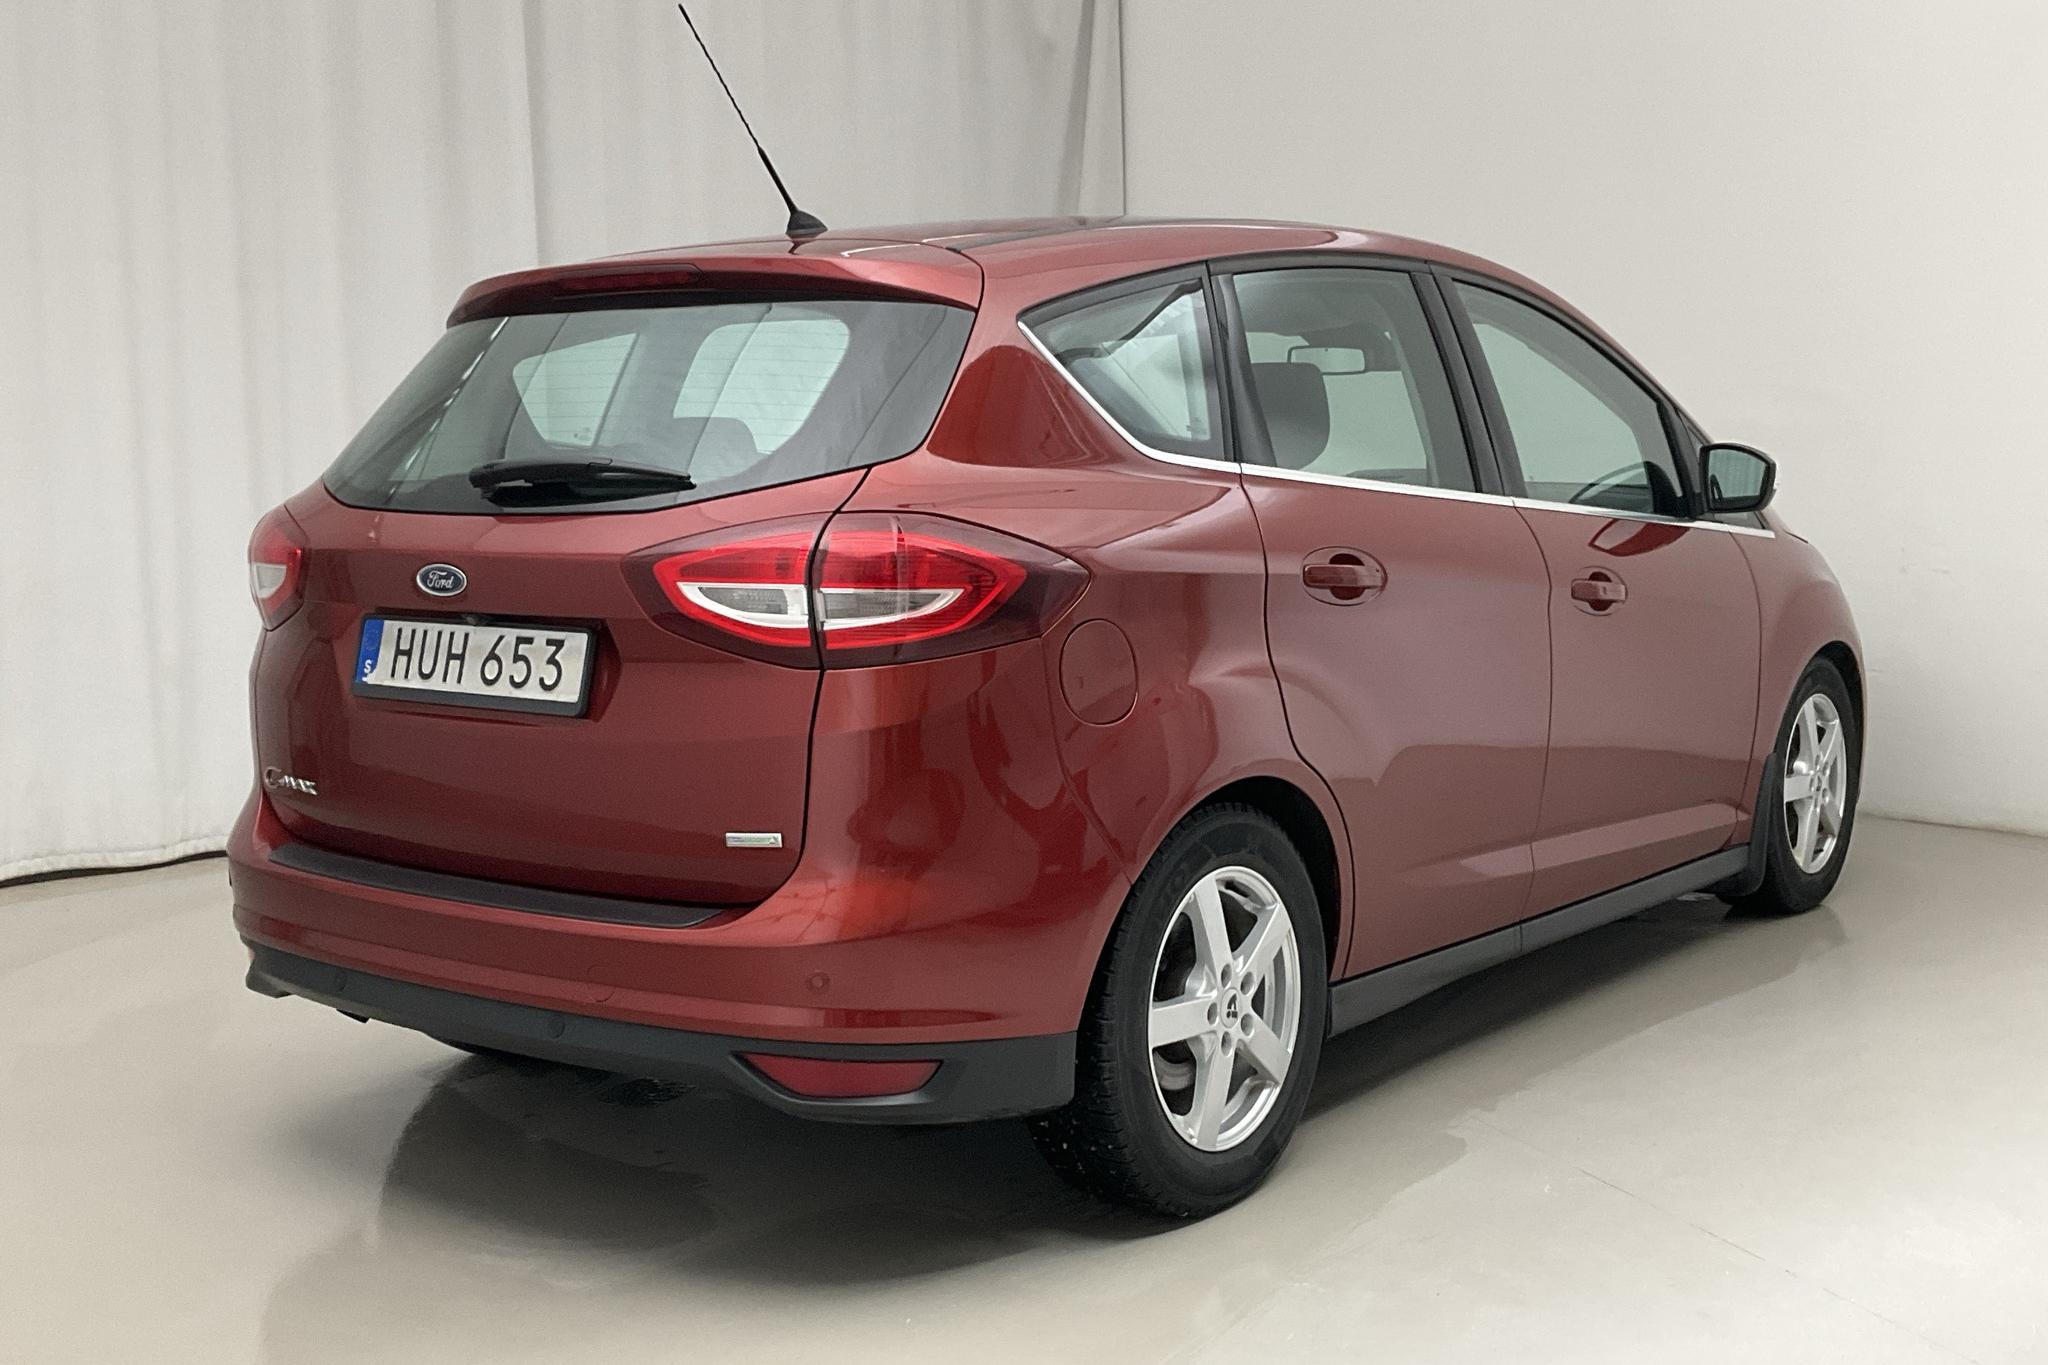 Ford C-MAX 1.0 Ecoboost (125hk) - 140 850 km - Manual - red - 2015